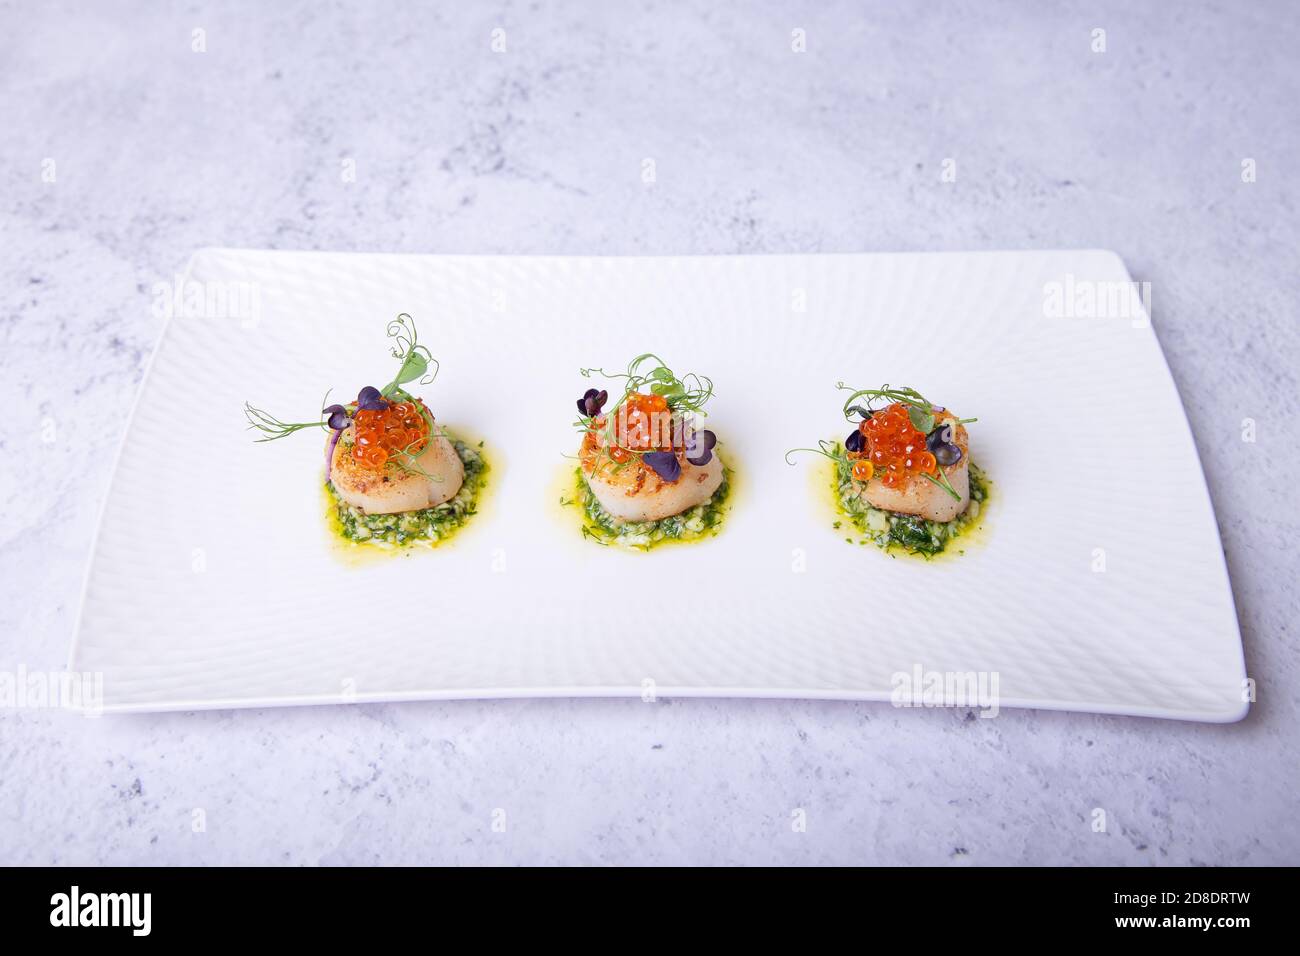 Scallops with caviar, microgreens and green sauce on a white plate. Close-up. Stock Photo